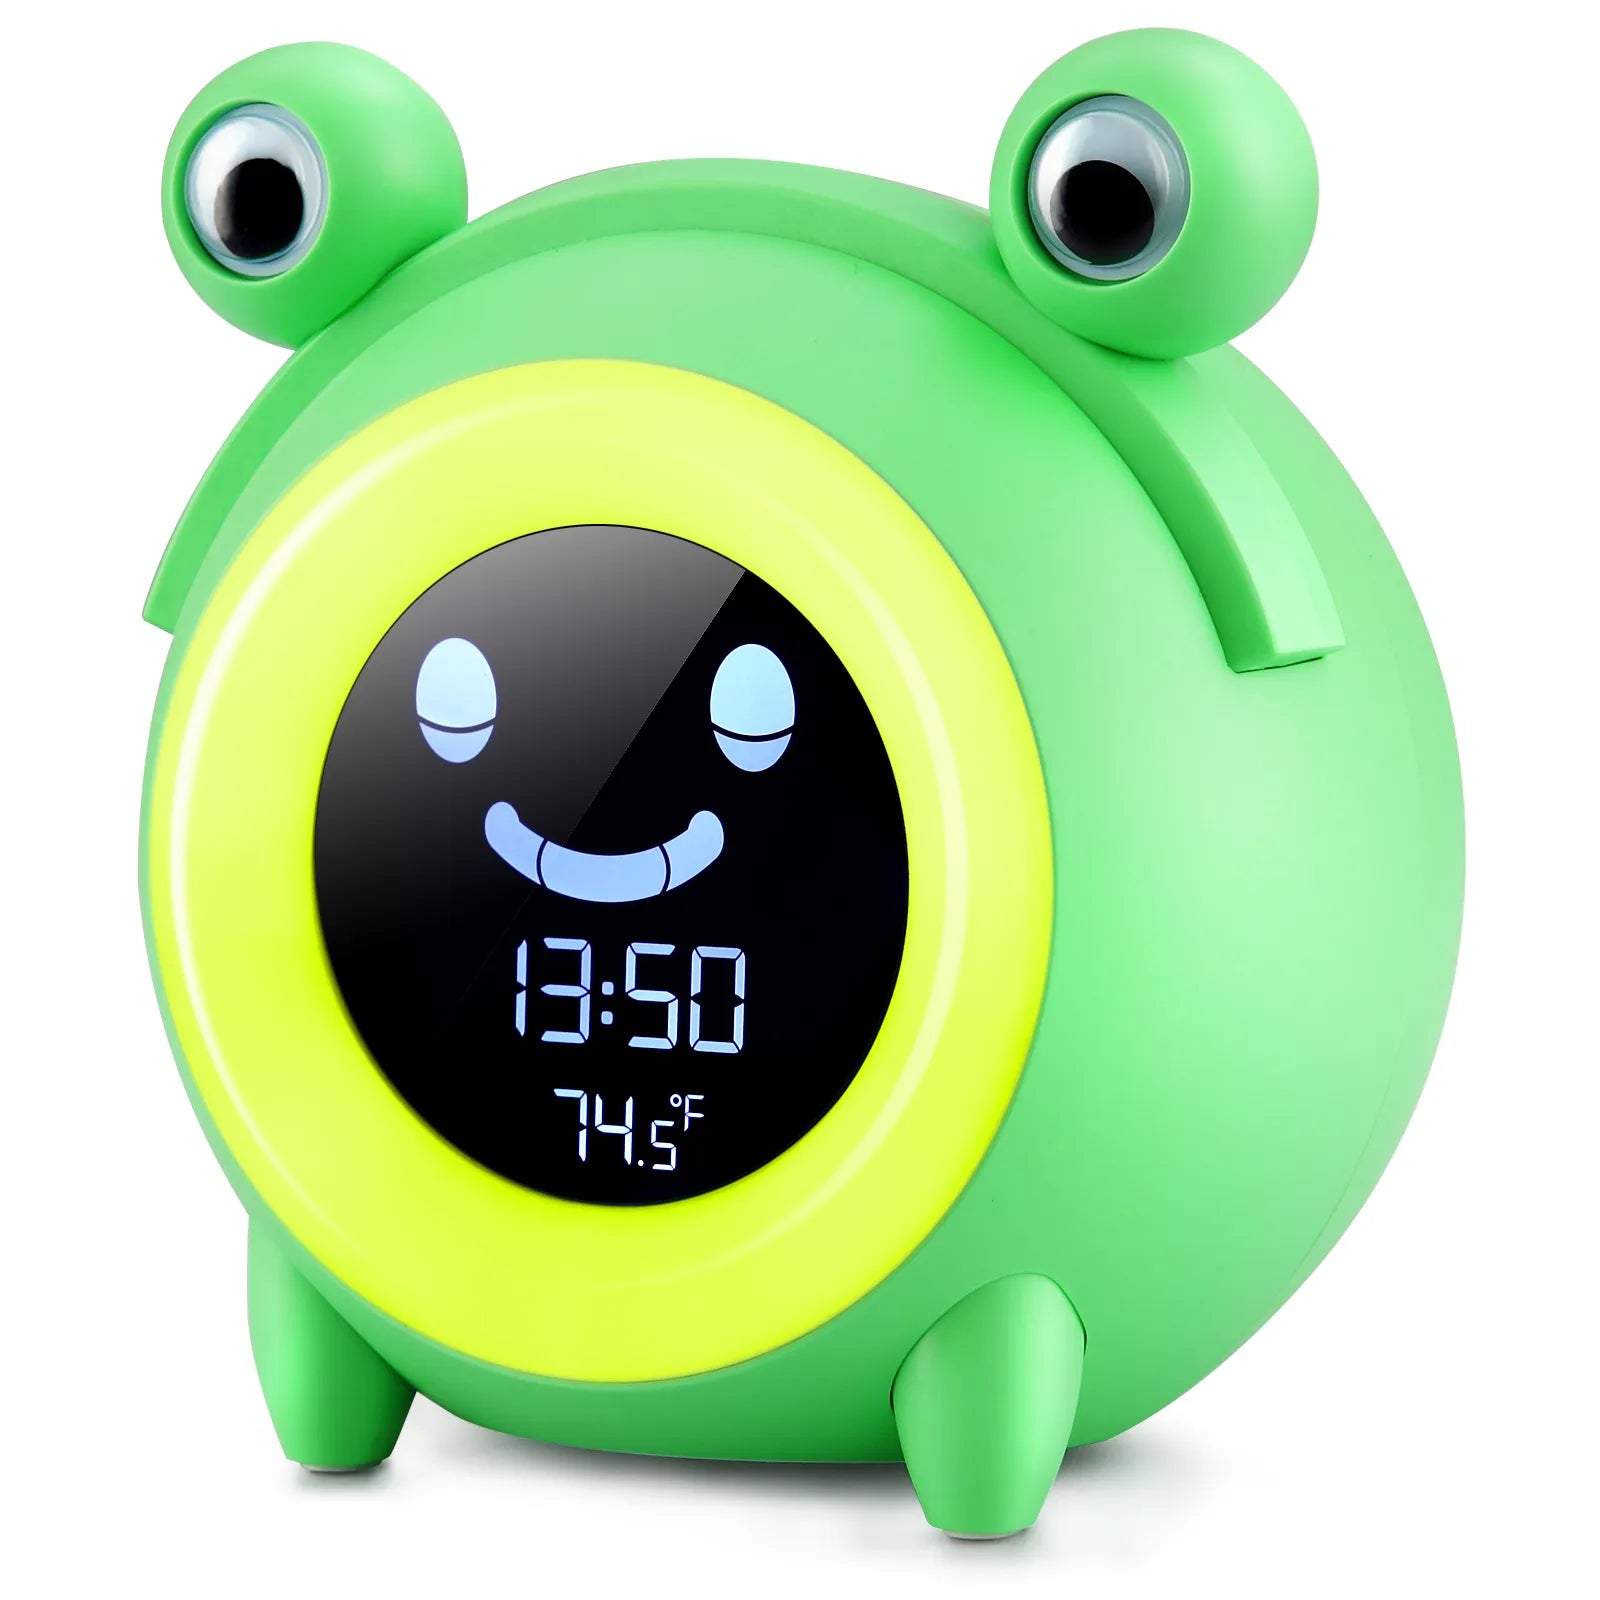 Child Alarm Clock with Cute Animal Design, Sleep Trainer, Digital Wake-Up, Colorful Night Light, Snooze, Temperature, NAP Timer - Perfect for Kids Green Frog